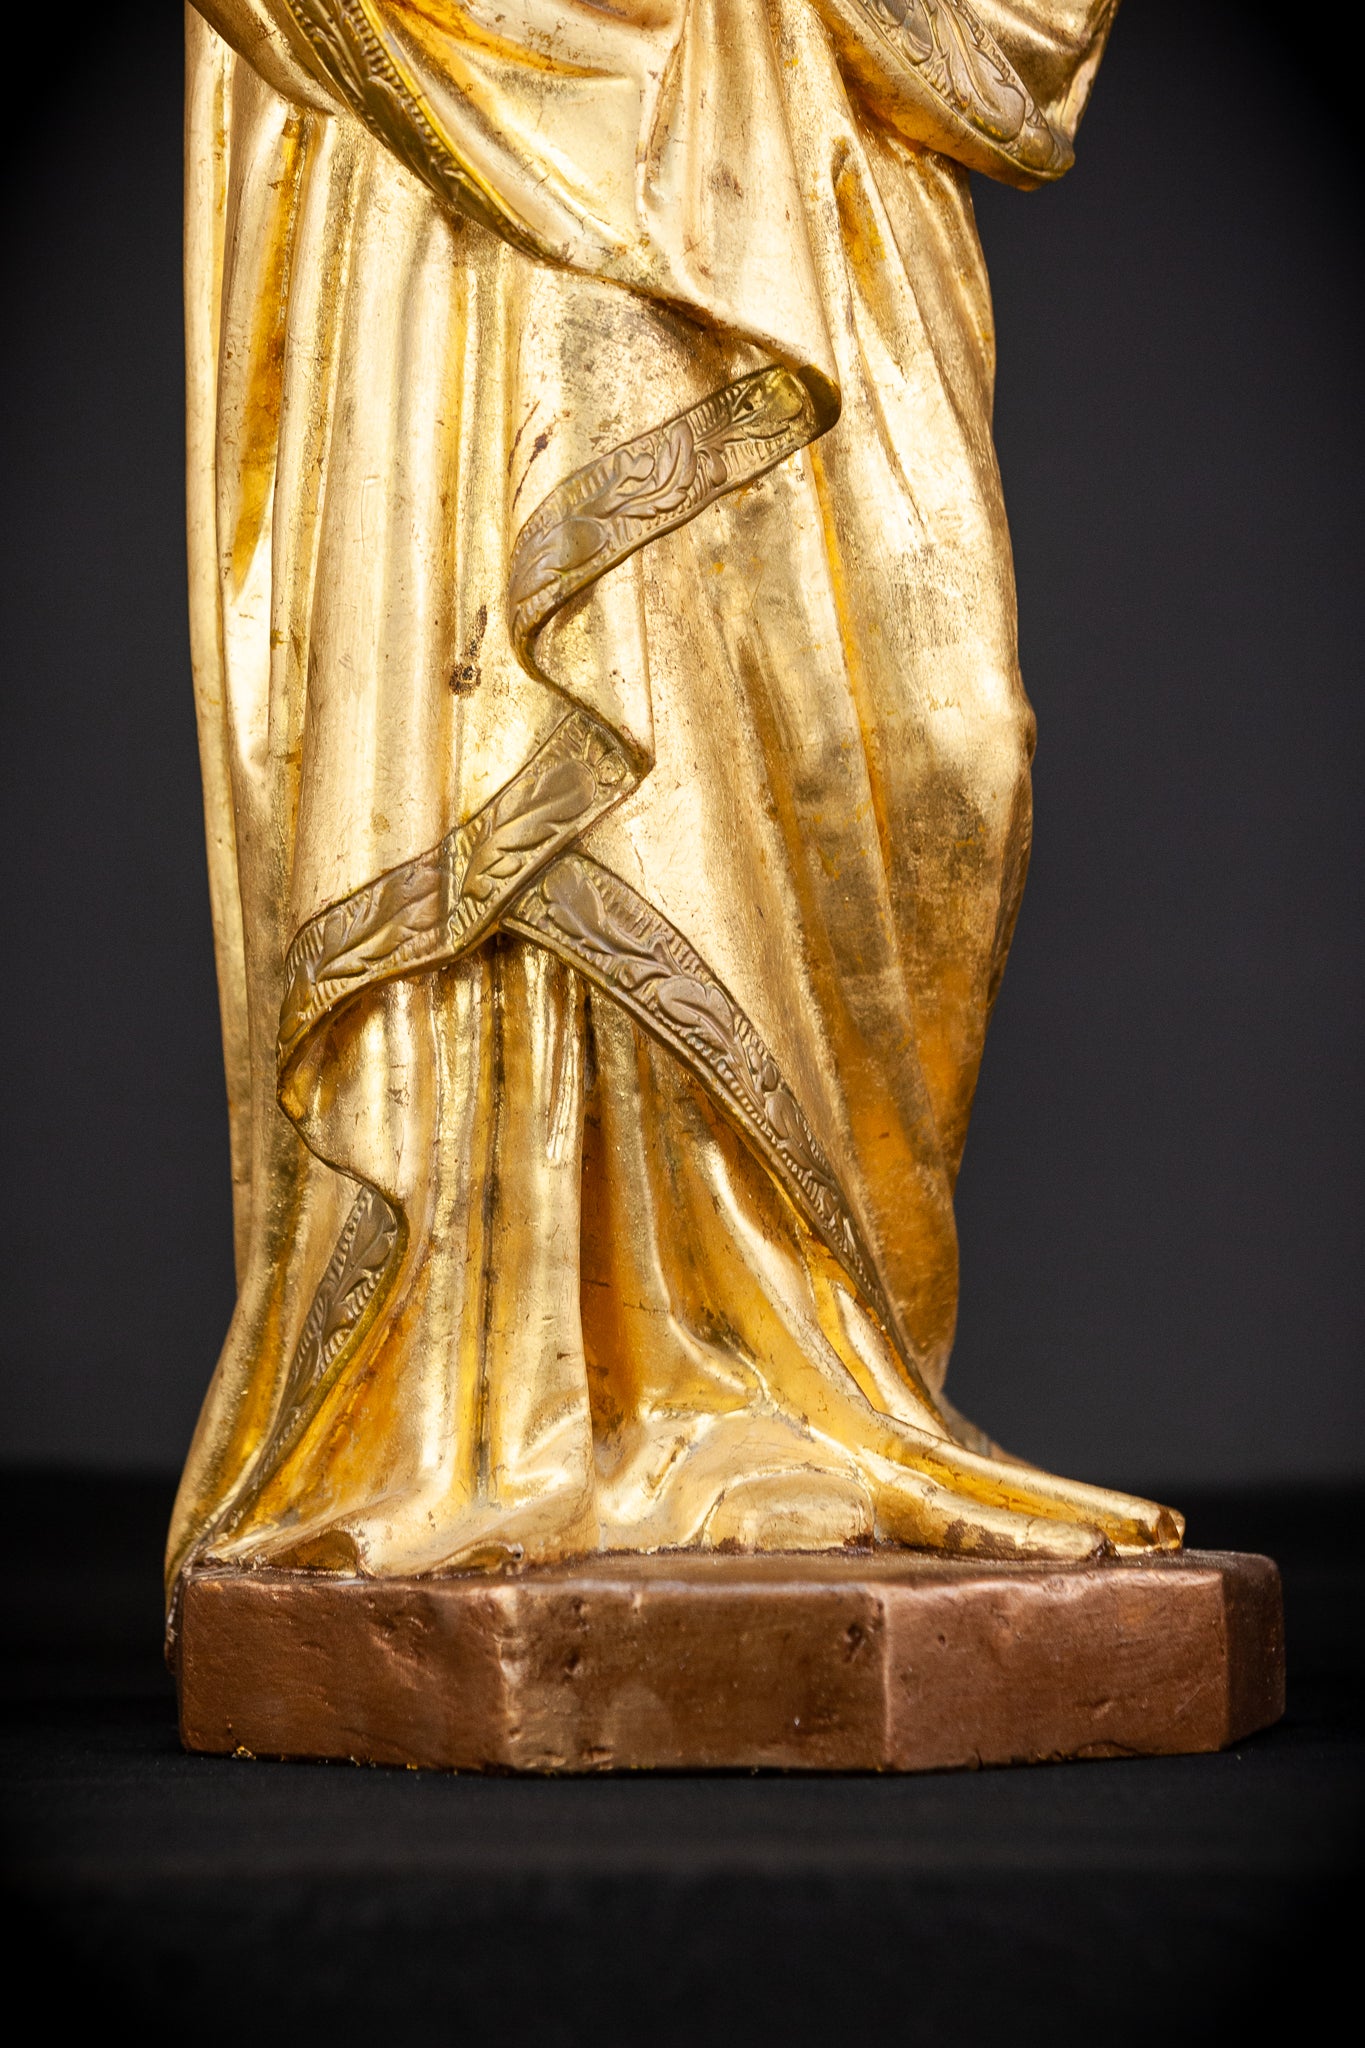 Virgin Mary with Child Jesus Gilded Wooden Sculpture | 1800s Antique | 27.2”/ 69 cm